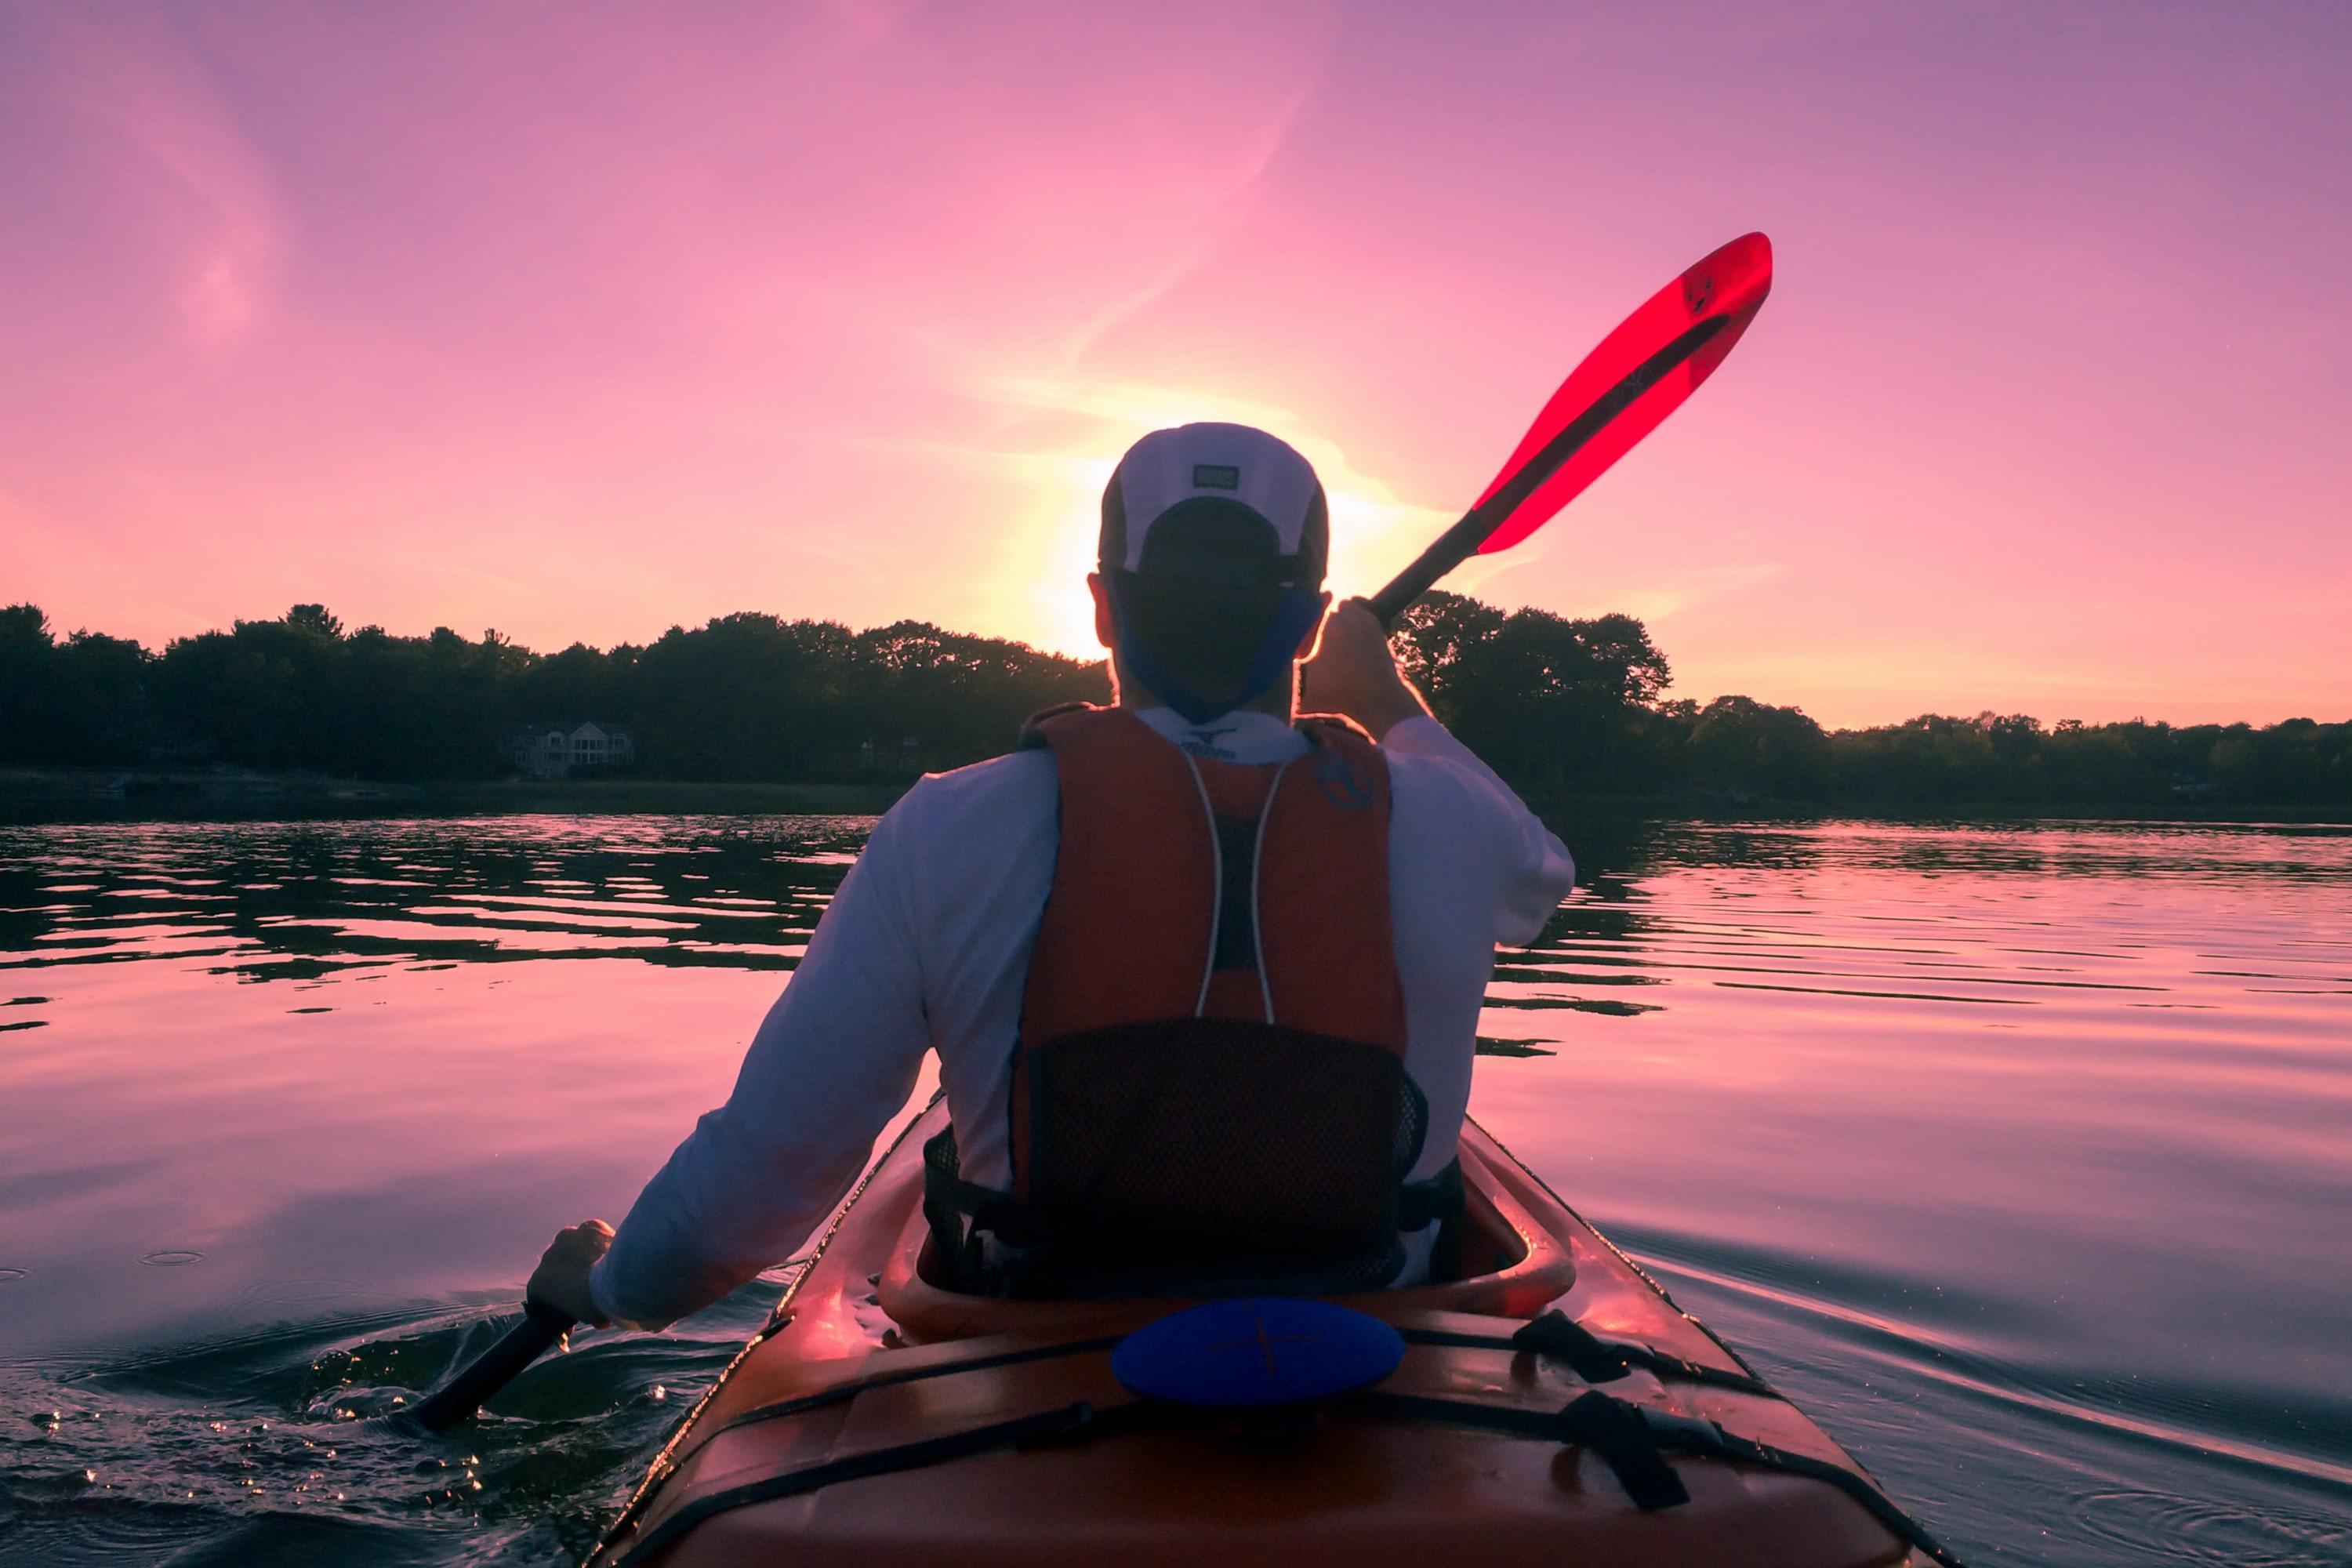 A person paddling a kayak on calm waters at sunset